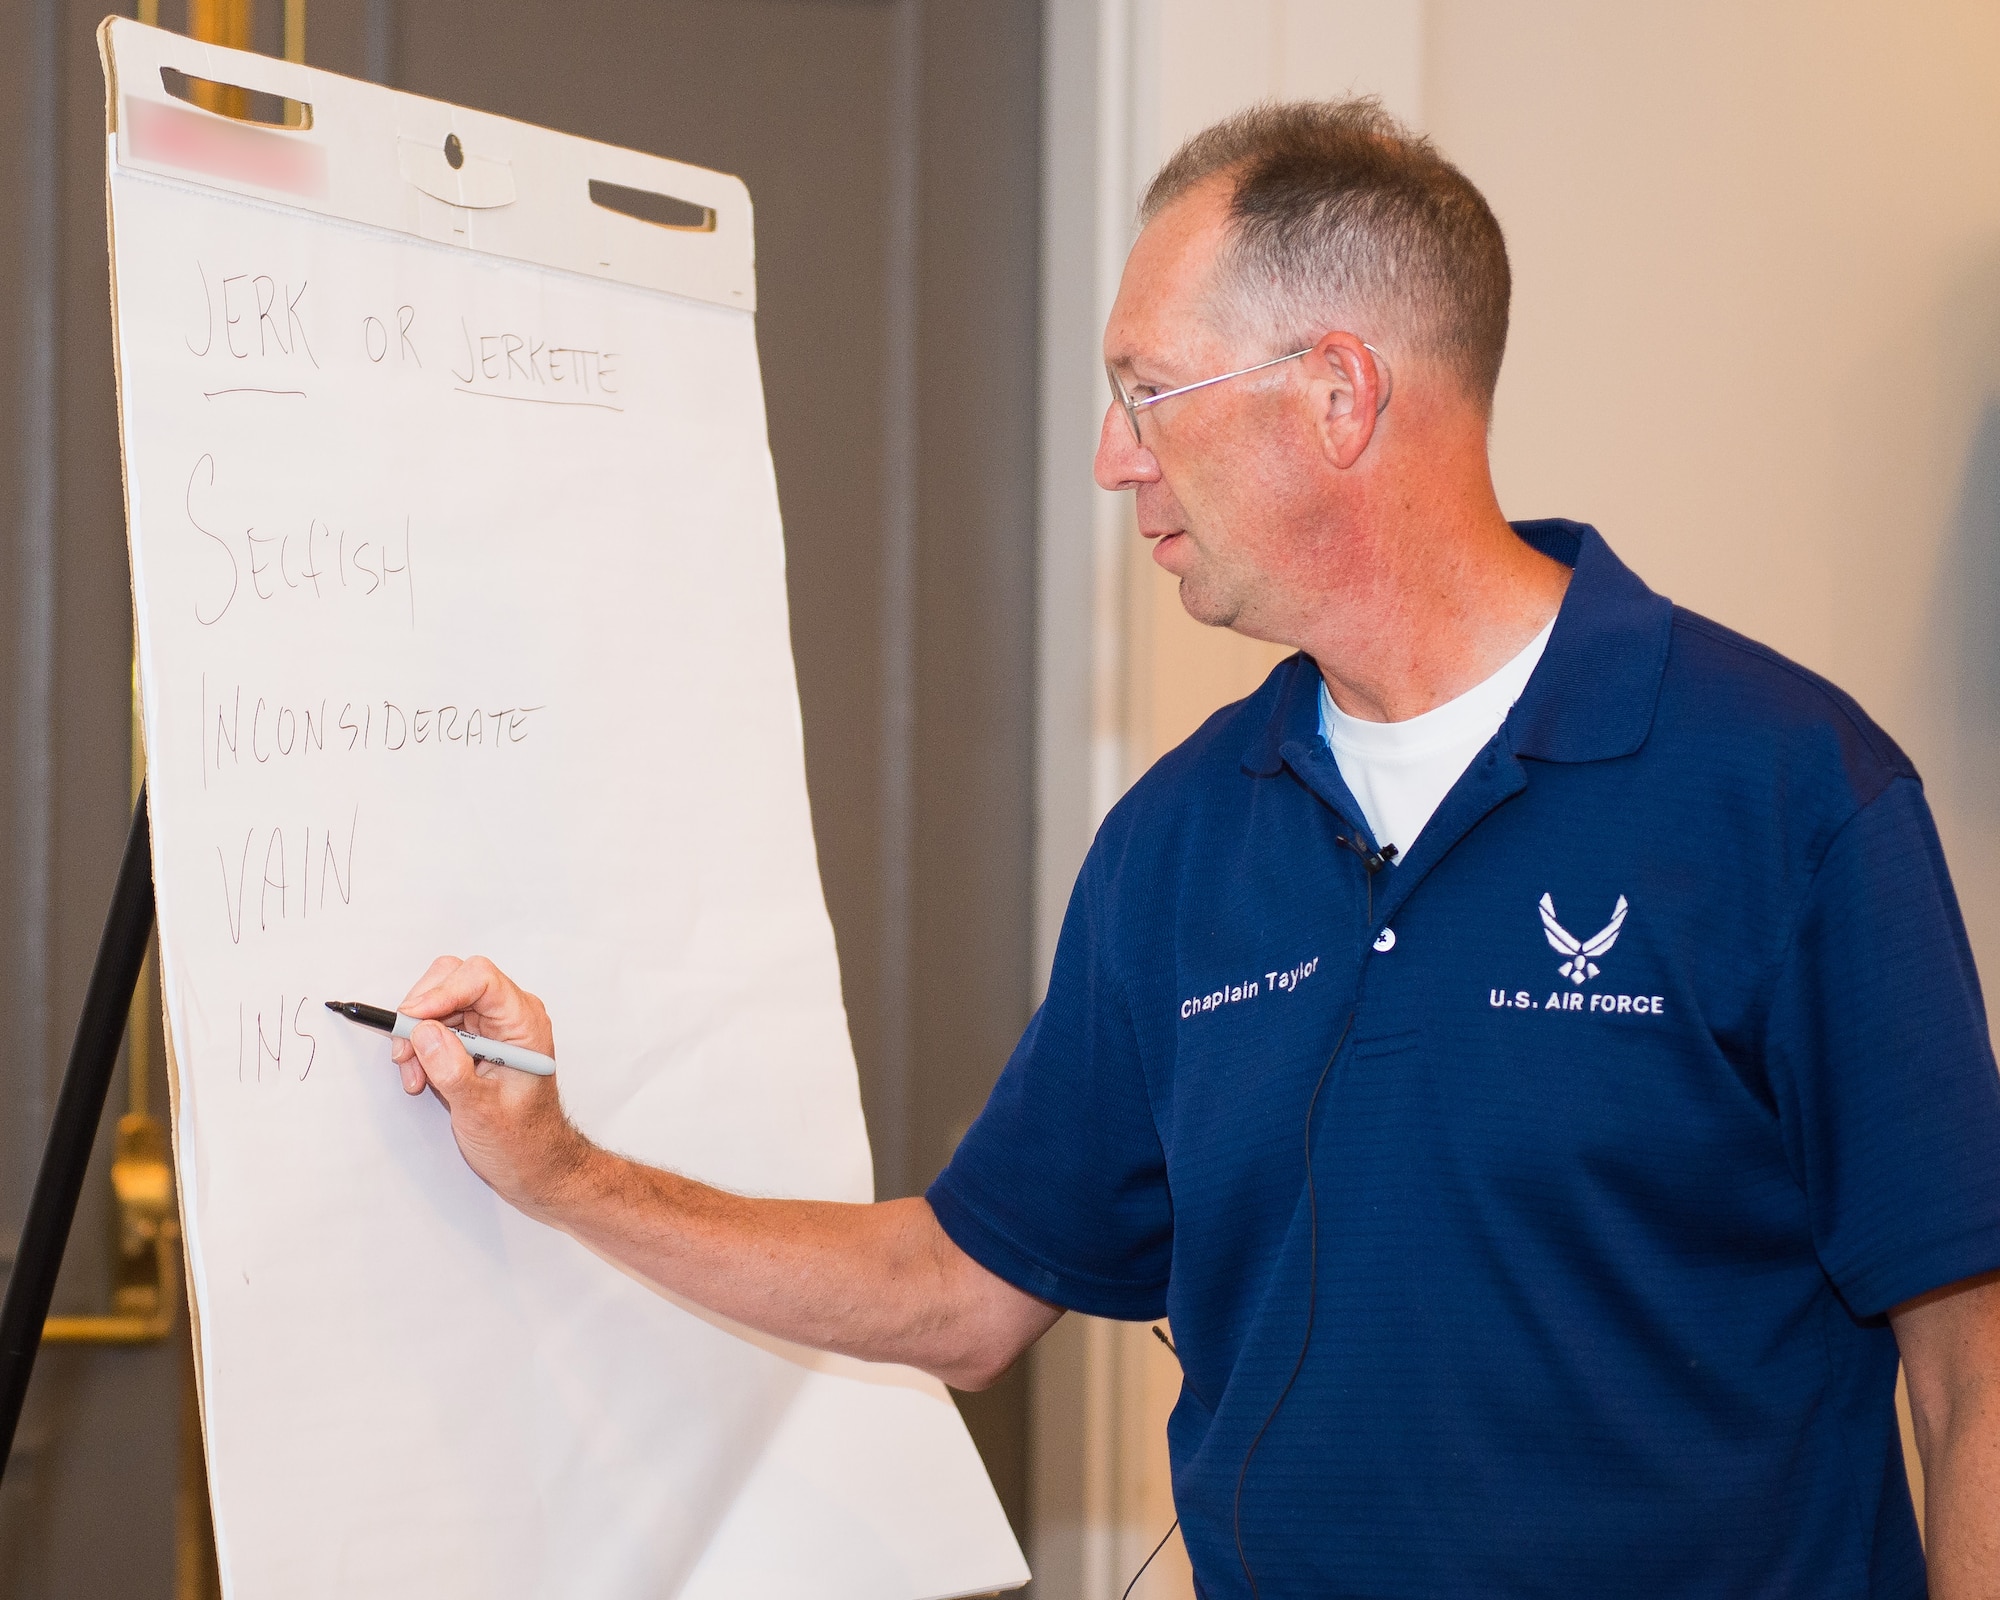 U.S. Air Force Maj. James Taylor, a chaplain and Strong Bonds instructor with the 116th Air Control Wing, Georgia Air National Guard, illustrates while teaching a class during the Strong Bonds singles retreat at the Sea Palms Resort, Saint Simons Island, Ga., June 26, 2015. The retreat, hosted by chaplains from the 116th Air Control wing, is a key component of the unit's resiliency program aimed at helping Airmen from Air National Guard units across Georgia to build relationships, learn to trust people, and hone their teambuilding skills. (U.S. Air National Guard photo by Senior Master Sgt. Roger Parsons/Released) (Portion of the photo blurred to removed name brand logo on presentation pad)